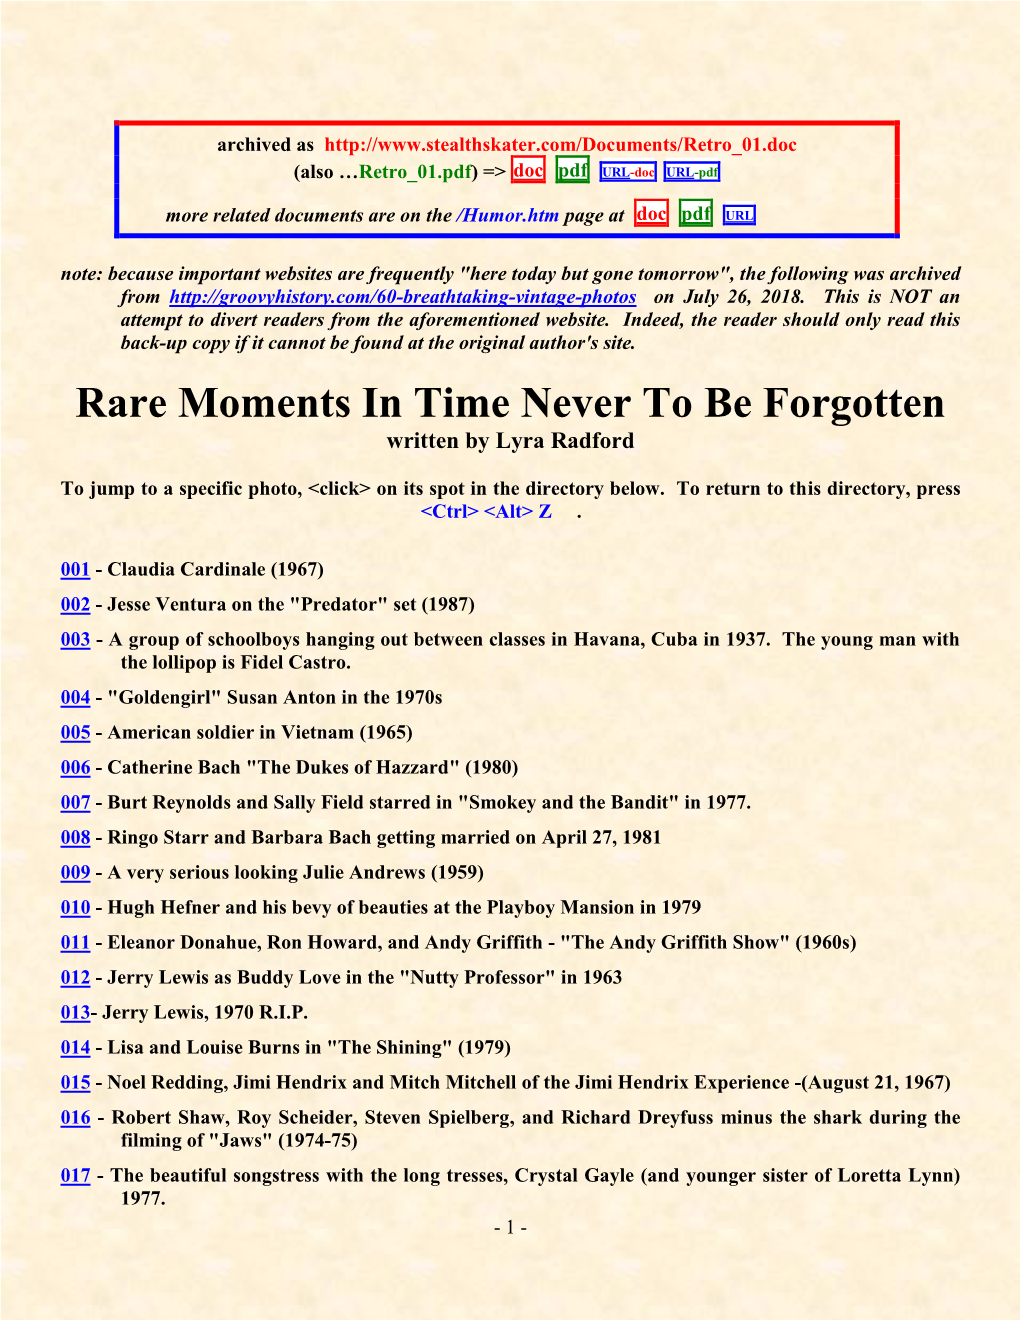 Rare Moments in Time Never to Be Forgotten Written by Lyra Radford